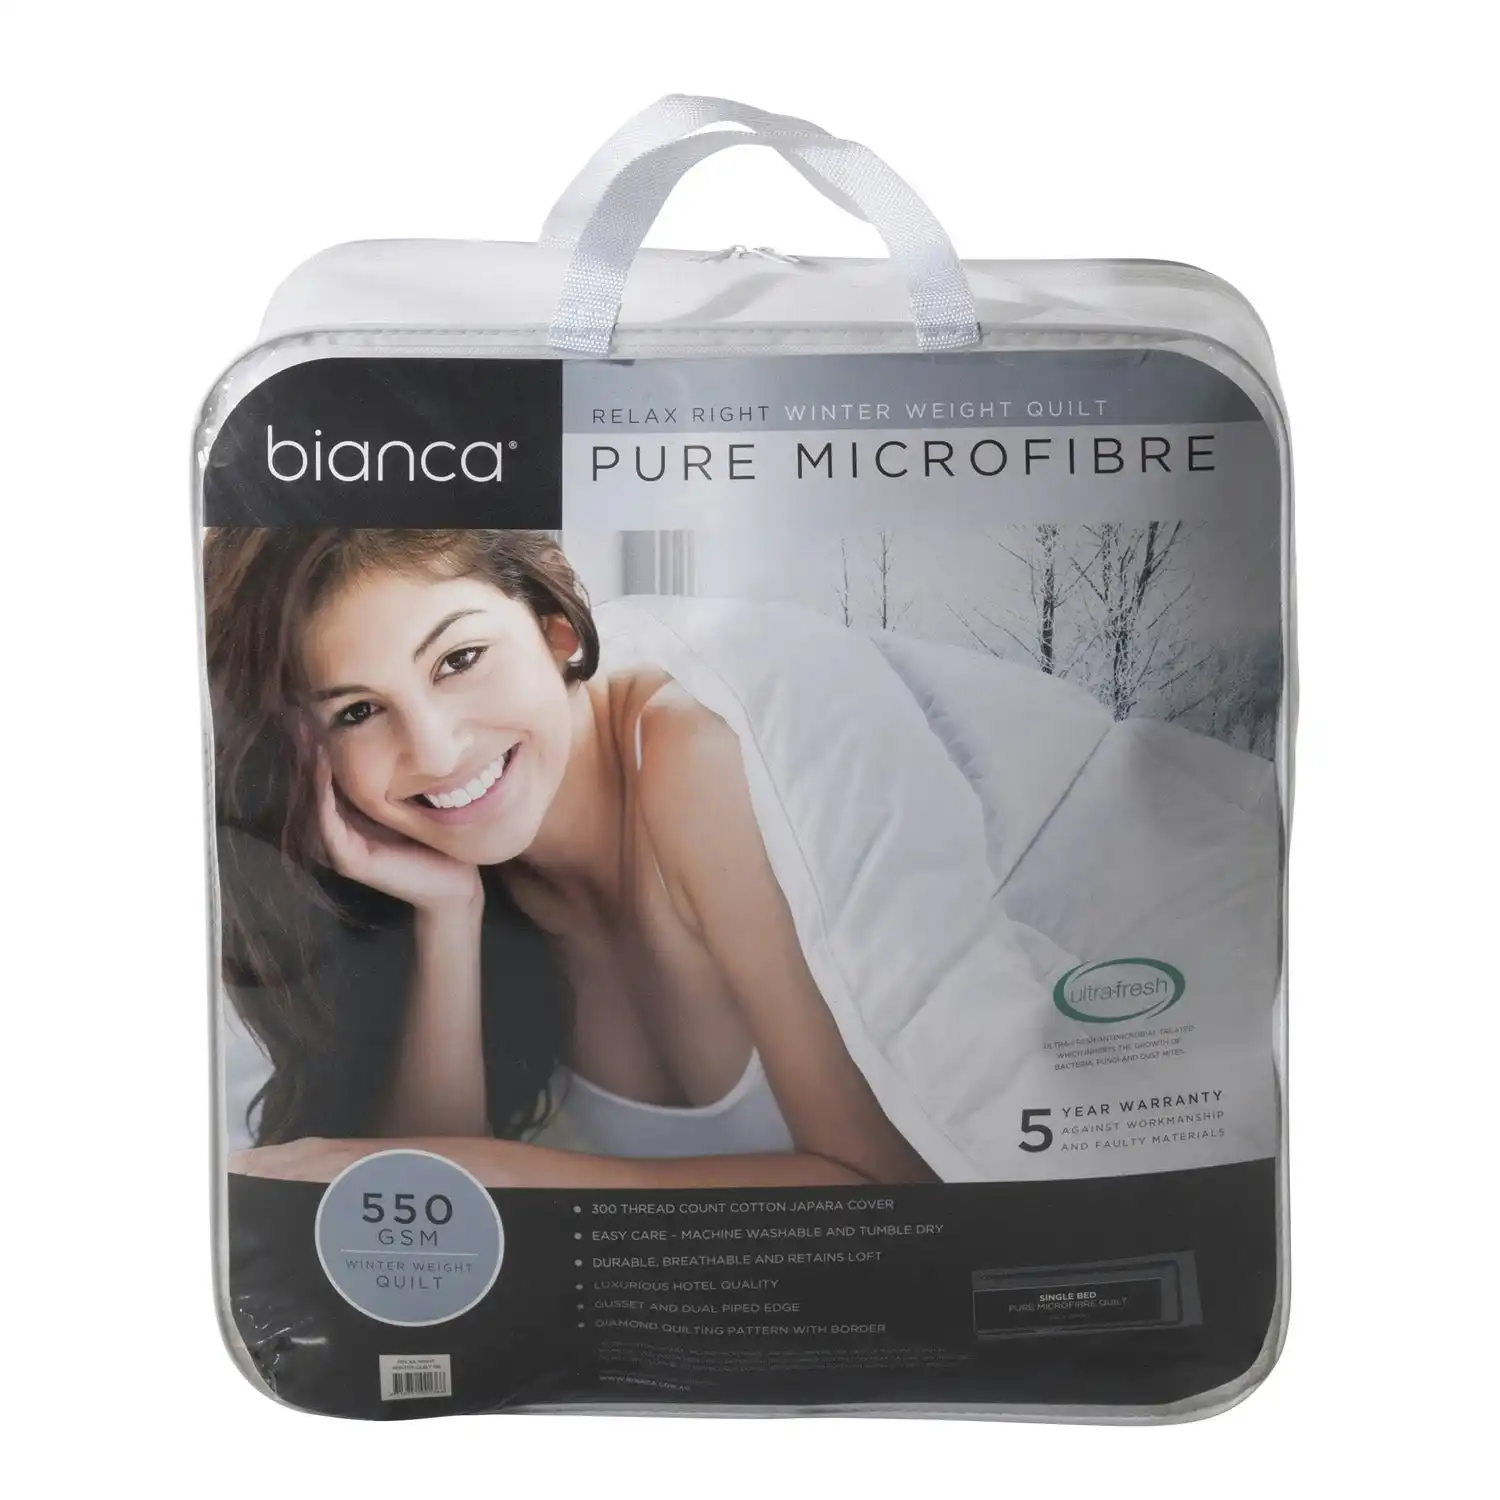 Bianca Bedding RELAX RIGHT PURE MICROFIBRE 550GSM WINTER WEIGHT QUILT